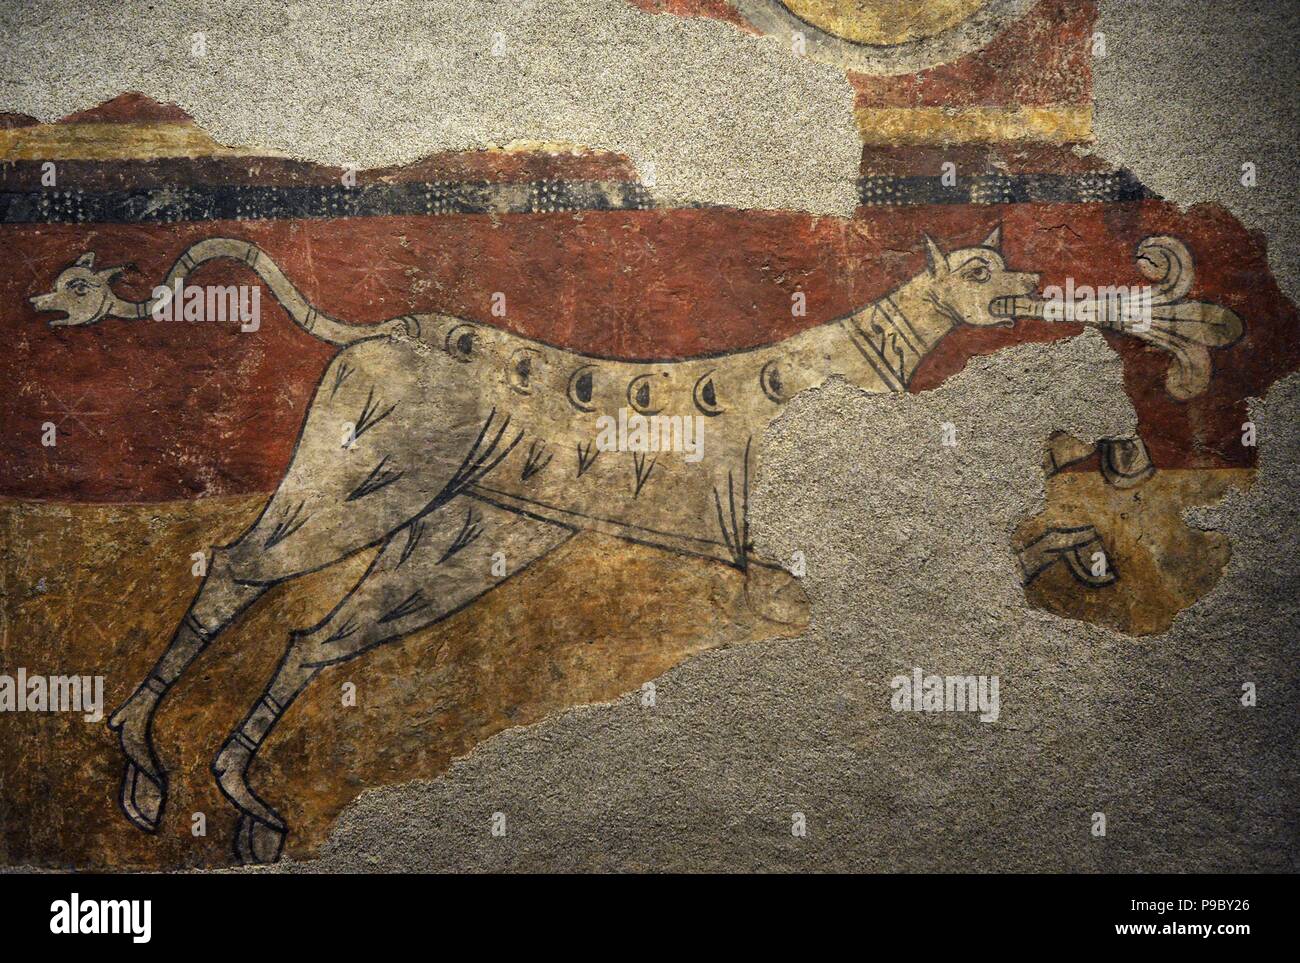 Master of Boi. Quadruped with Fleur-de-lis from Boi. Ca.1100. From the north aisle of the Parish Church of Sant Joan de Boi, Boi Valley. Fresco transferred to canvas. National Art Museum of Catalonia. Barcelona. Catalonia. Spain. Stock Photo